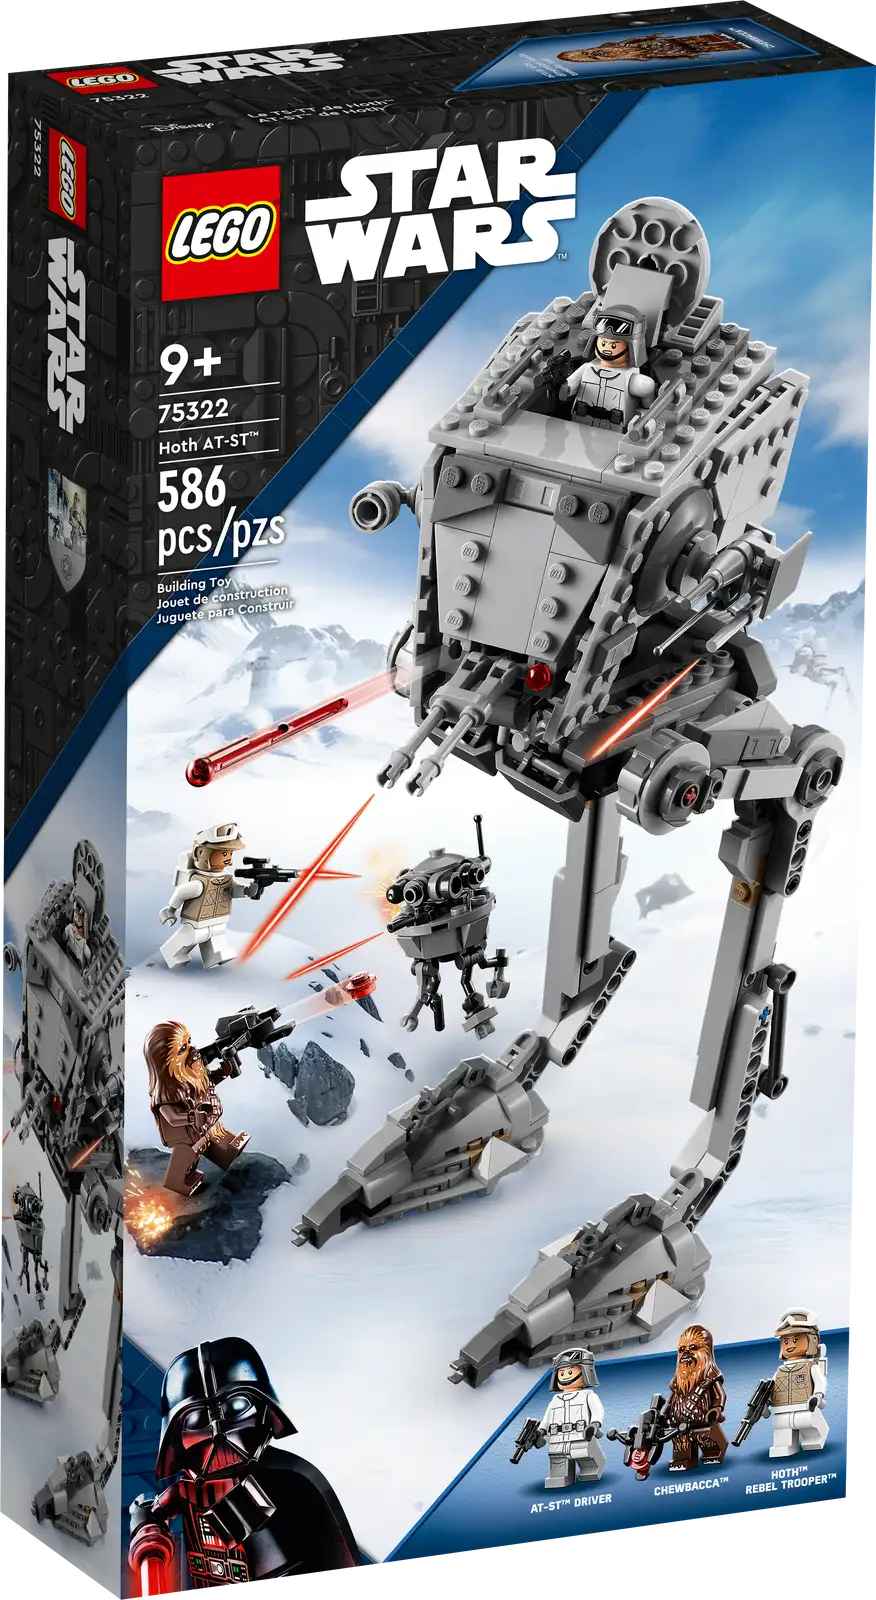 Invite young kids to learn to build and play in the thrilling LEGO® Star Wars™ universe, with this AT-ST (75332) starter set. An ideal gift for ages 4 and up, it features an easy-to-build 4+ version of the AT-ST walker from Star Wars: The Return of the Jedi, with a minifigure cockpit. There are also Wicket, Scout Trooper and AT-ST Driver LEGO minifigures with weapons, plus a speeder and Ewok lookout with a tree and catapult to role-play Battle of Endor scenes. App-assisted building Check out the free LEGO Building Instructions app for digital instructions, plus zoom and rotate viewing tools, to make the creative experience even more fun and rewarding for children. The 4+ experience LEGO Star Wars 4+ building toys give younger kids aged 4 and up the best introduction to LEGO building and the Star Wars saga. With Starter Brick bases to help them, they can construct vehicles, buildings and more – on their own or with help from an older sibling or adult – and get playing fast. Learn-to-build LEGO® Star Wars™ set – Introduce young children to Star Wars: The Return of the Jedi adventures with the LEGO 4+ version of an AT-ST (75332), featuring a Starter Brick for a quick build 3 LEGO® minifigures with weapons – Wicket the Ewok with a bow and arrow, and a Scout Trooper and AT-ST Driver, each with a blaster pistol, to role-play Battle of Endor action Posable AT-ST walker, speeder and Ewok lookout – The AT-ST has a cockpit for the AT-ST Driver, and the Ewok hideoutfeatures a tree and a catapult for Wicket to launch stone elements Gift idea for ages 4+ – Easy to build and rebuild after battles, this 87-piece LEGO® Star Wars™ starter set makes a fun birthday present, holiday gift or surprise treat for creative kids aged 4 and up Portable play – The brick-built AT-ST model measures over 4.5 in. (12 cm) high, 2.5 in. (6 cm) long and 3 in. (8 cm) wide, so it fits easily into a child’s backpack ready for play on the go Fun to build together – This setis designed to help young children learn to build independently or with the assistance of an older sibling or adult Go digital – Make building this set extra exciting for youngsters with digital instructions, available in the LEGO® Building Instructions app, featuring zoom and rotate viewing tools The 4+ experience – LEGO® Star Wars™ 4+ construction toys give kids a fun introduction to the Star Wars universe, helping them learn to build and develop their imaginations through play Quality assurance – LEGO® components comply with the highest industry standards to ensure a consistent, secure connection and robust builds Safety first – LEGO® components are tested to the max to make sure that they satisfy stringent global safety standards